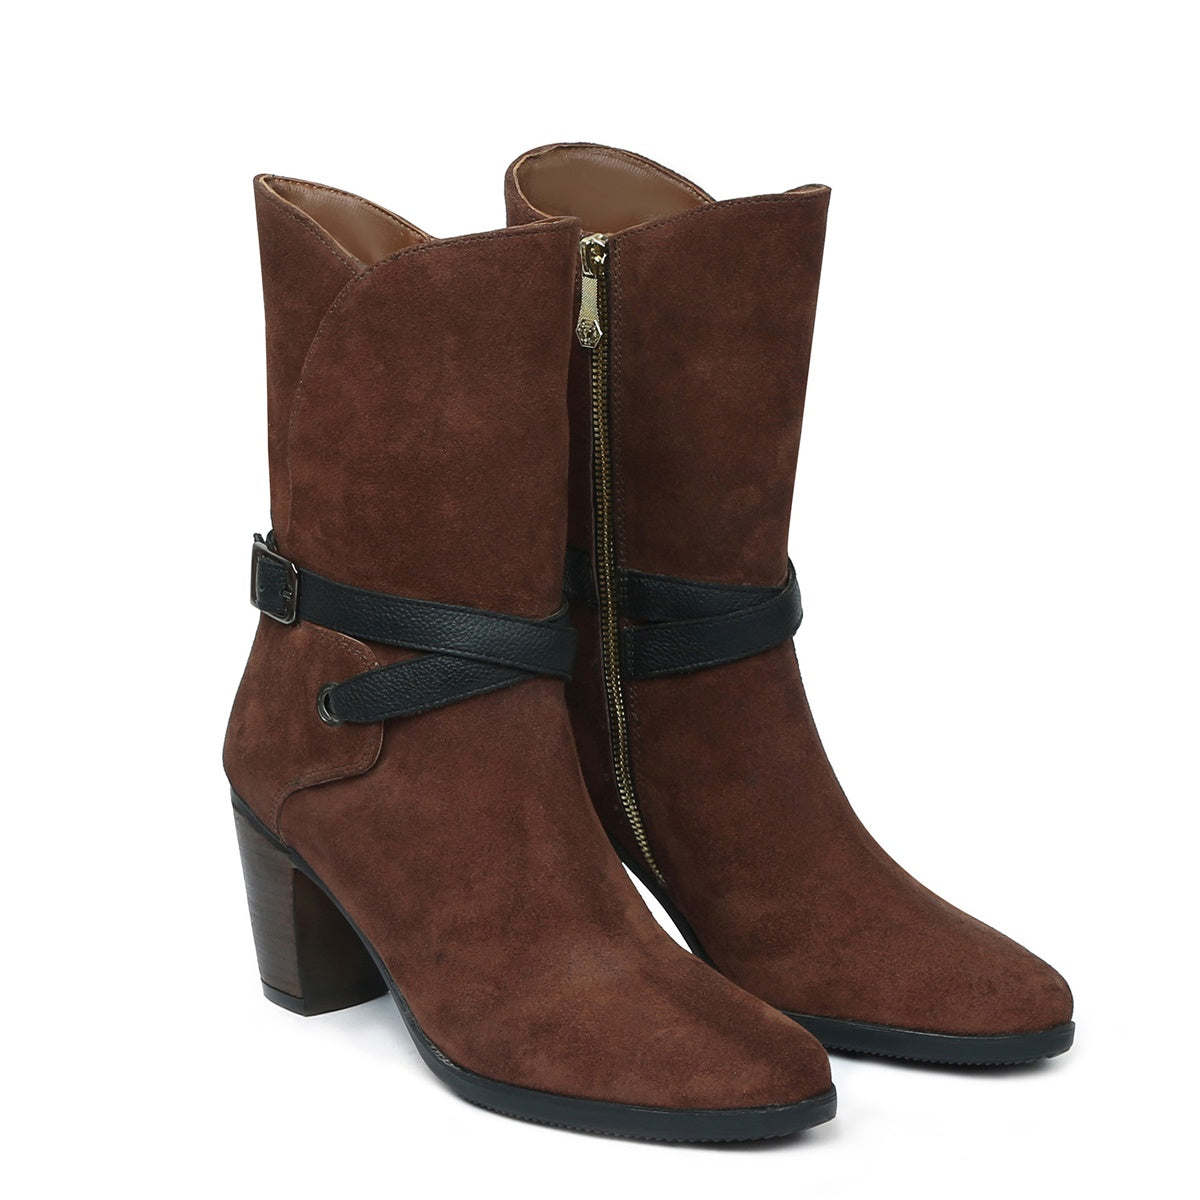 Brown Suede Leather High Ankle Blocked Heel With Black Strap Ladies Boots By Brune & Bareskin